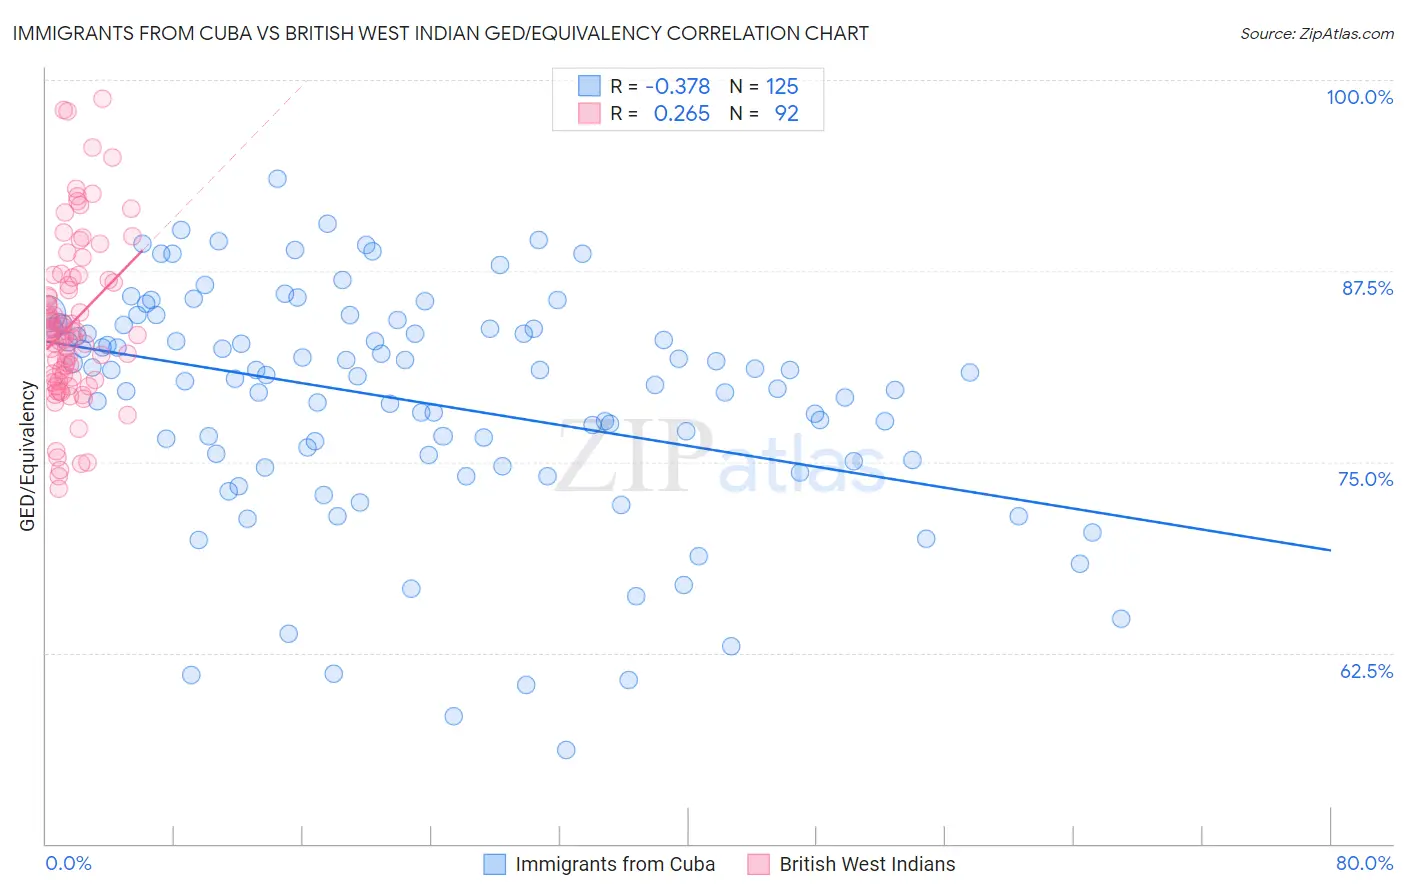 Immigrants from Cuba vs British West Indian GED/Equivalency